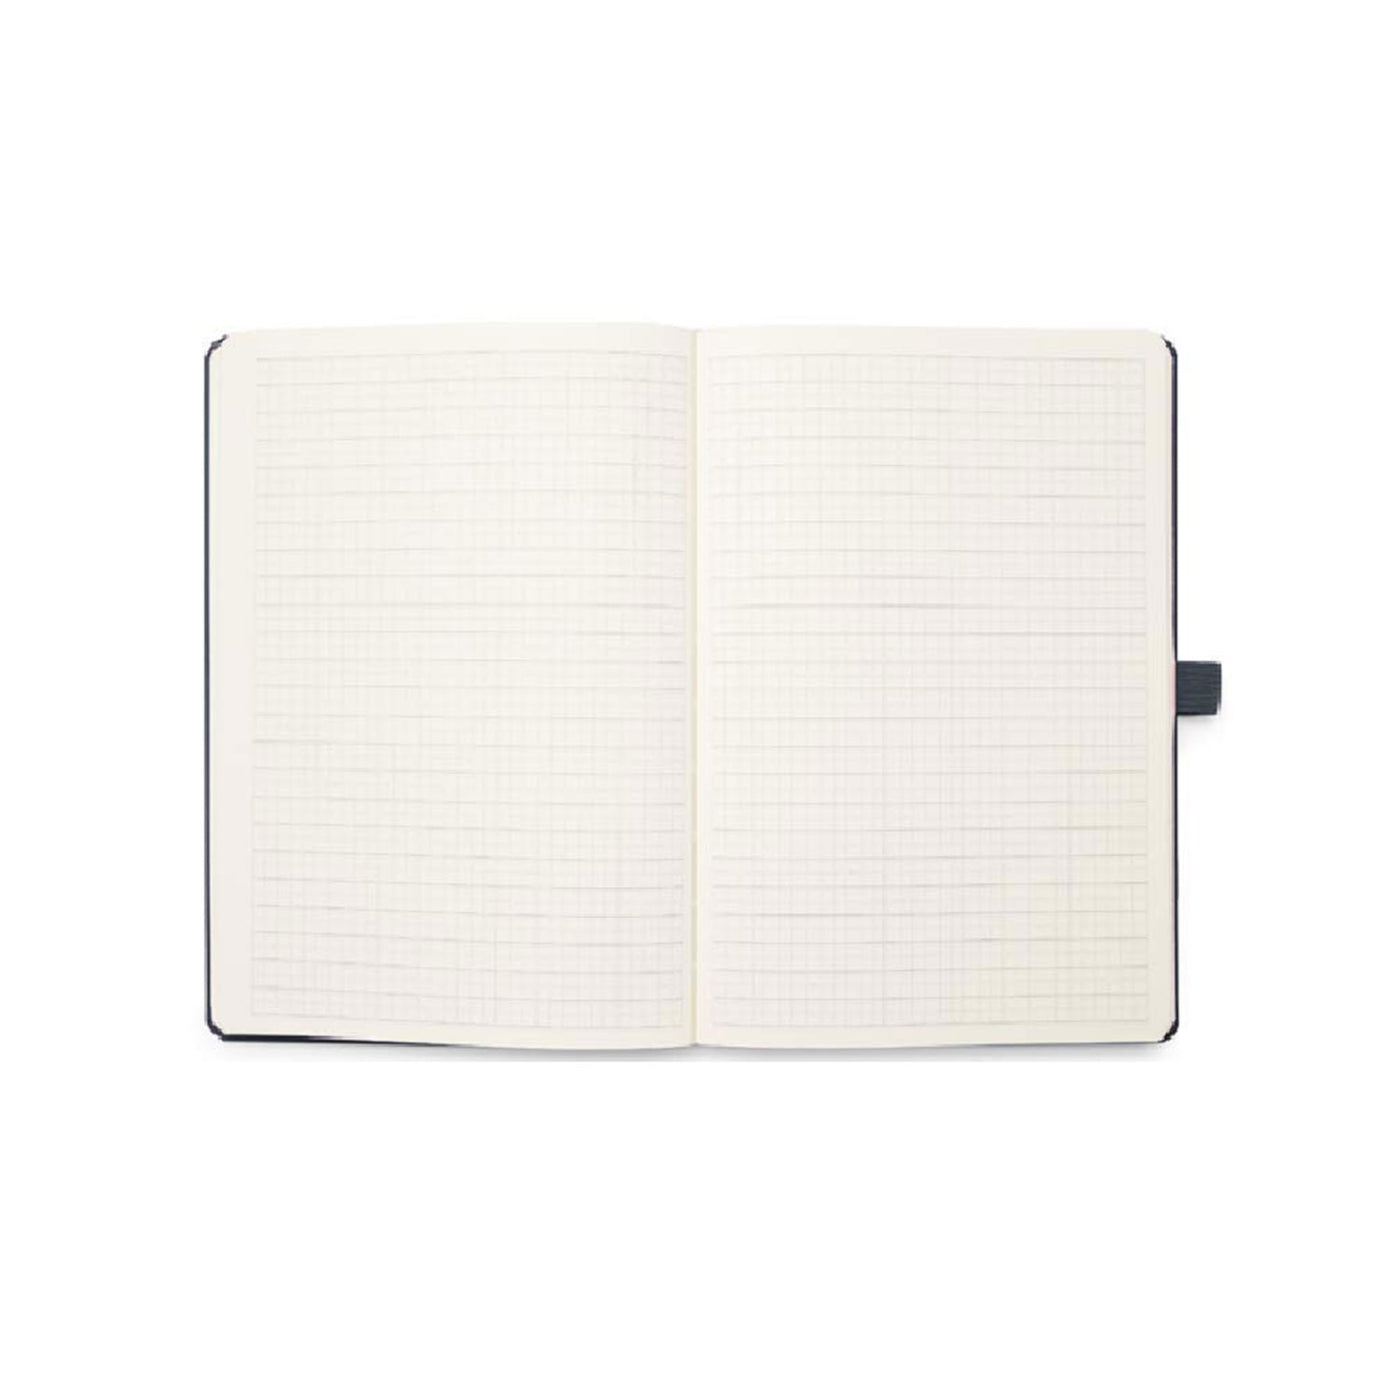 Lamy Hardcover Ruled Notebook Black - A5 2